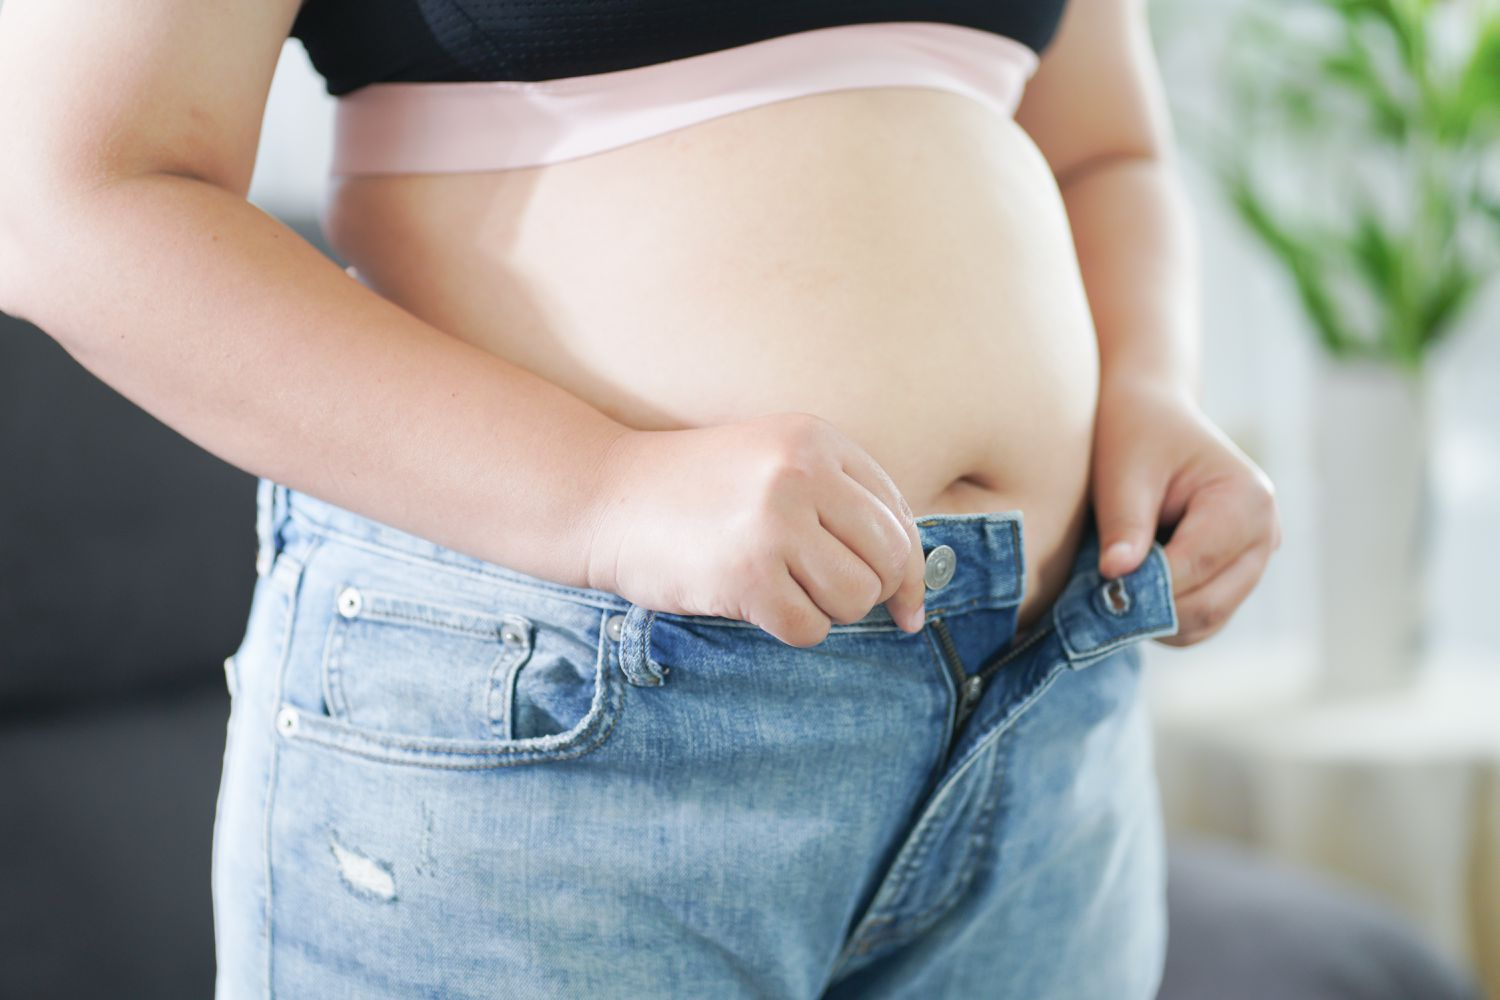 Why Do I Feel So Bloated? A Guide to Understanding and Taming the Puffy Belly